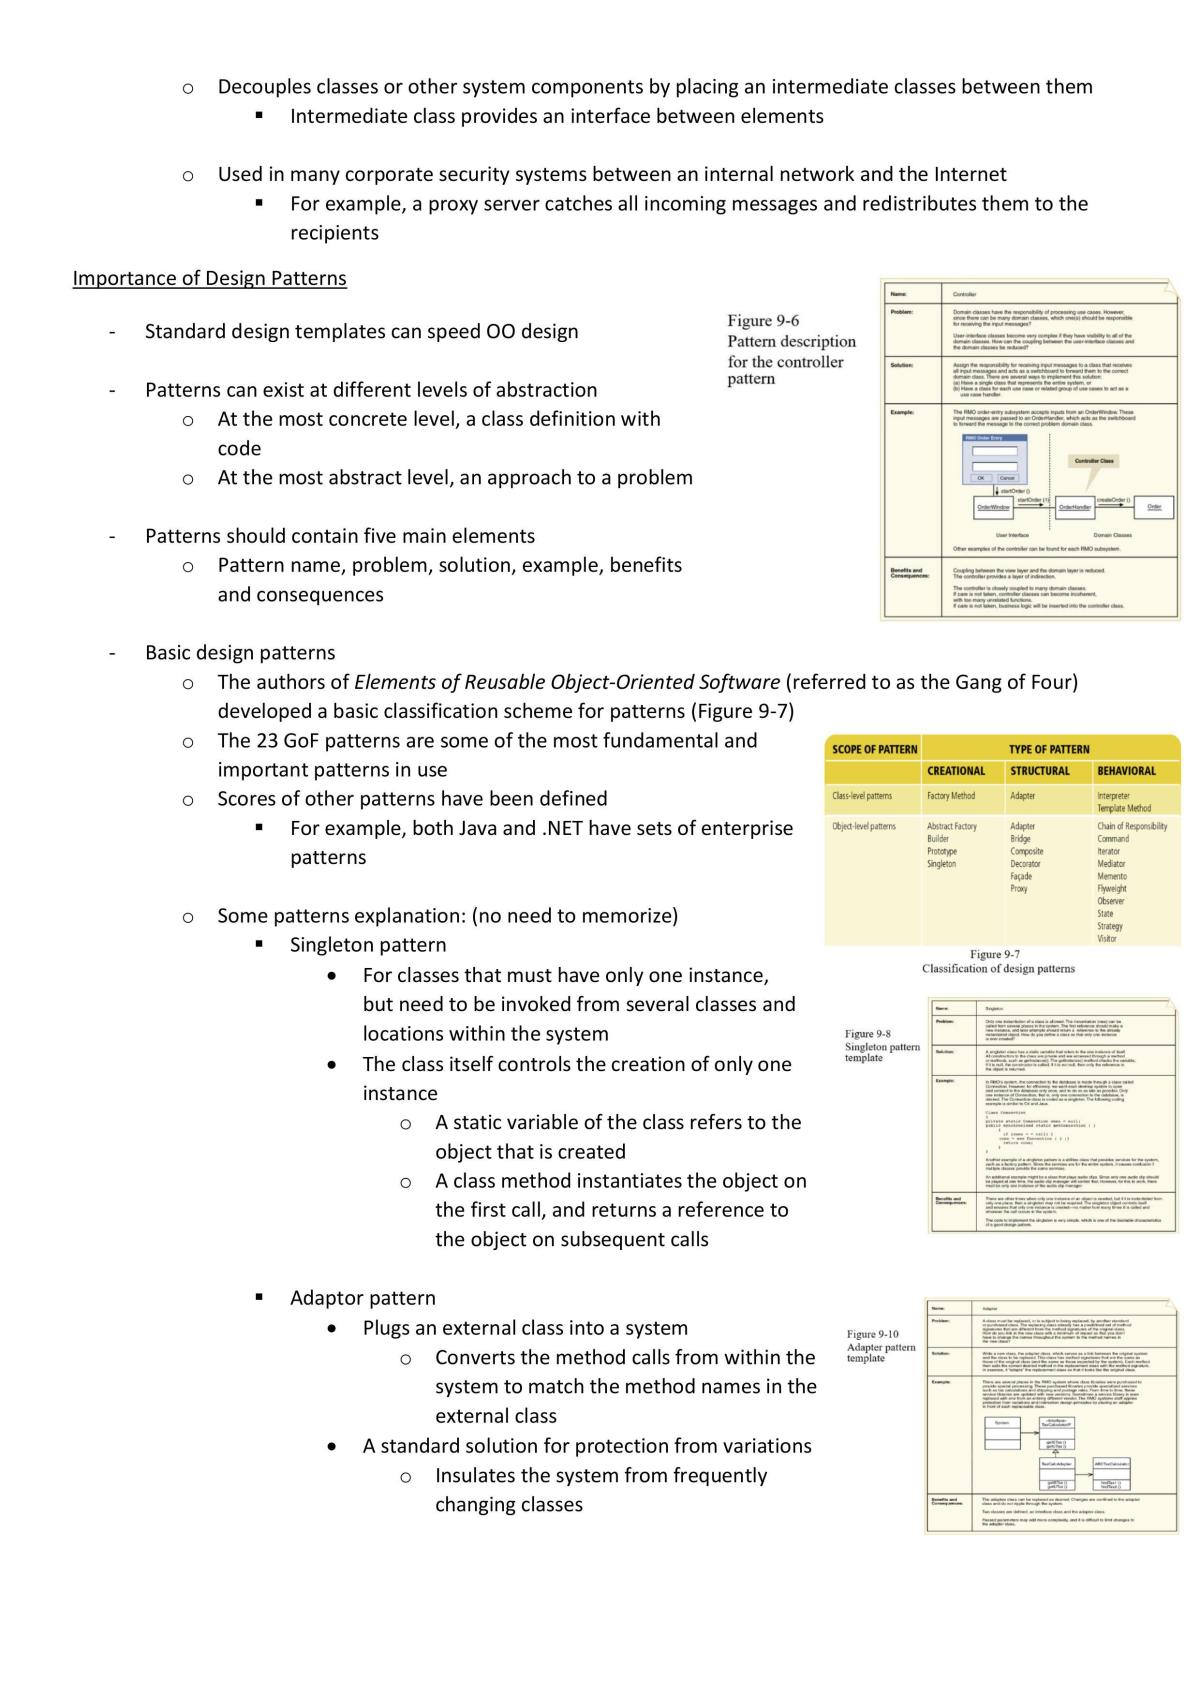 Object-Oriented Analysis and Design Note - Page 65